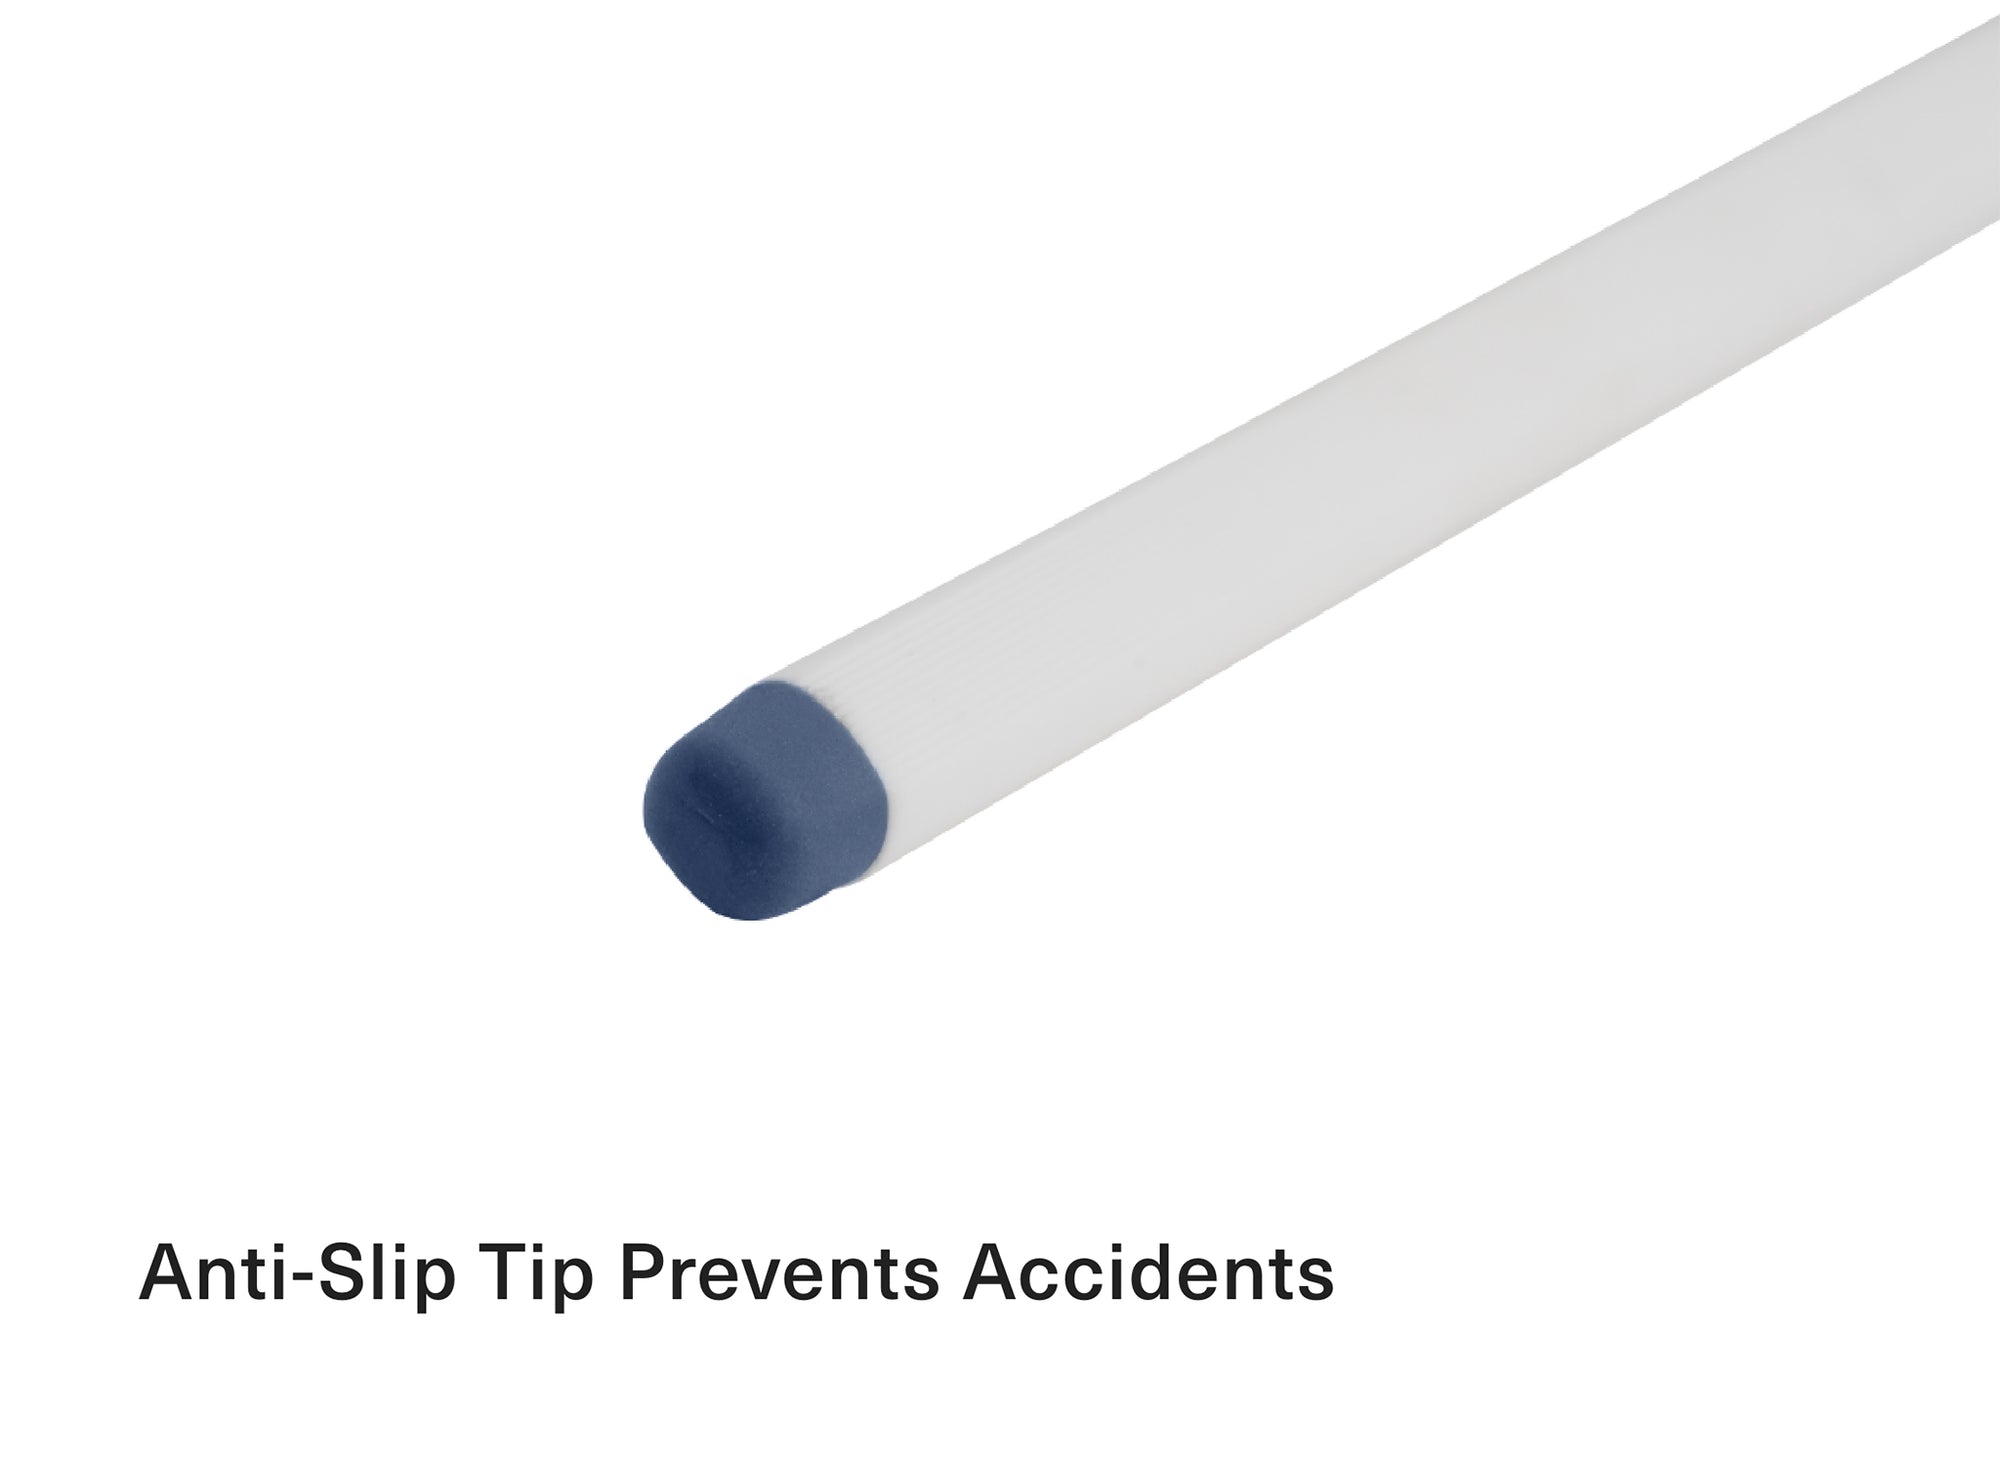 The anti-slip tip of the Misen Honing Rod is made of rubber for stability and to prevent accidents.